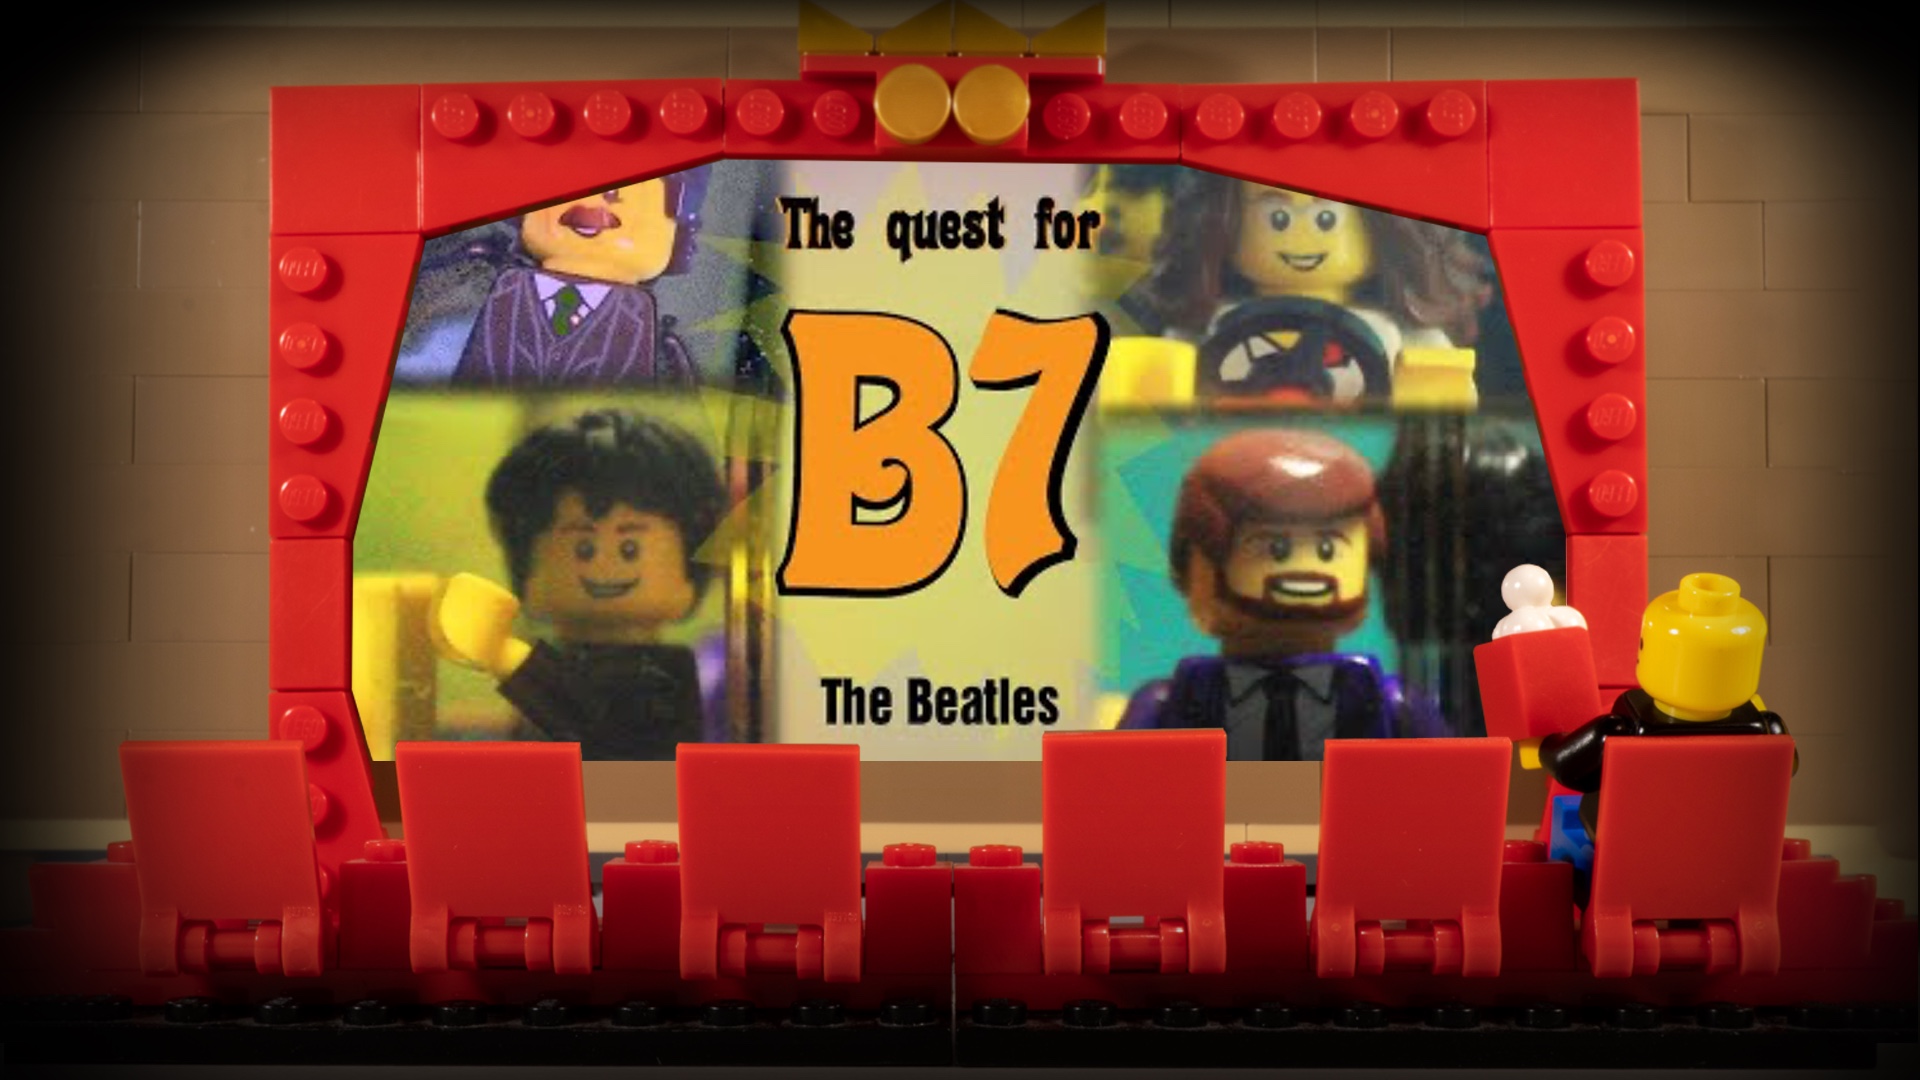 #Stop Motion Sonntag 288: Lego The Beatles - The Story of B7 Chord